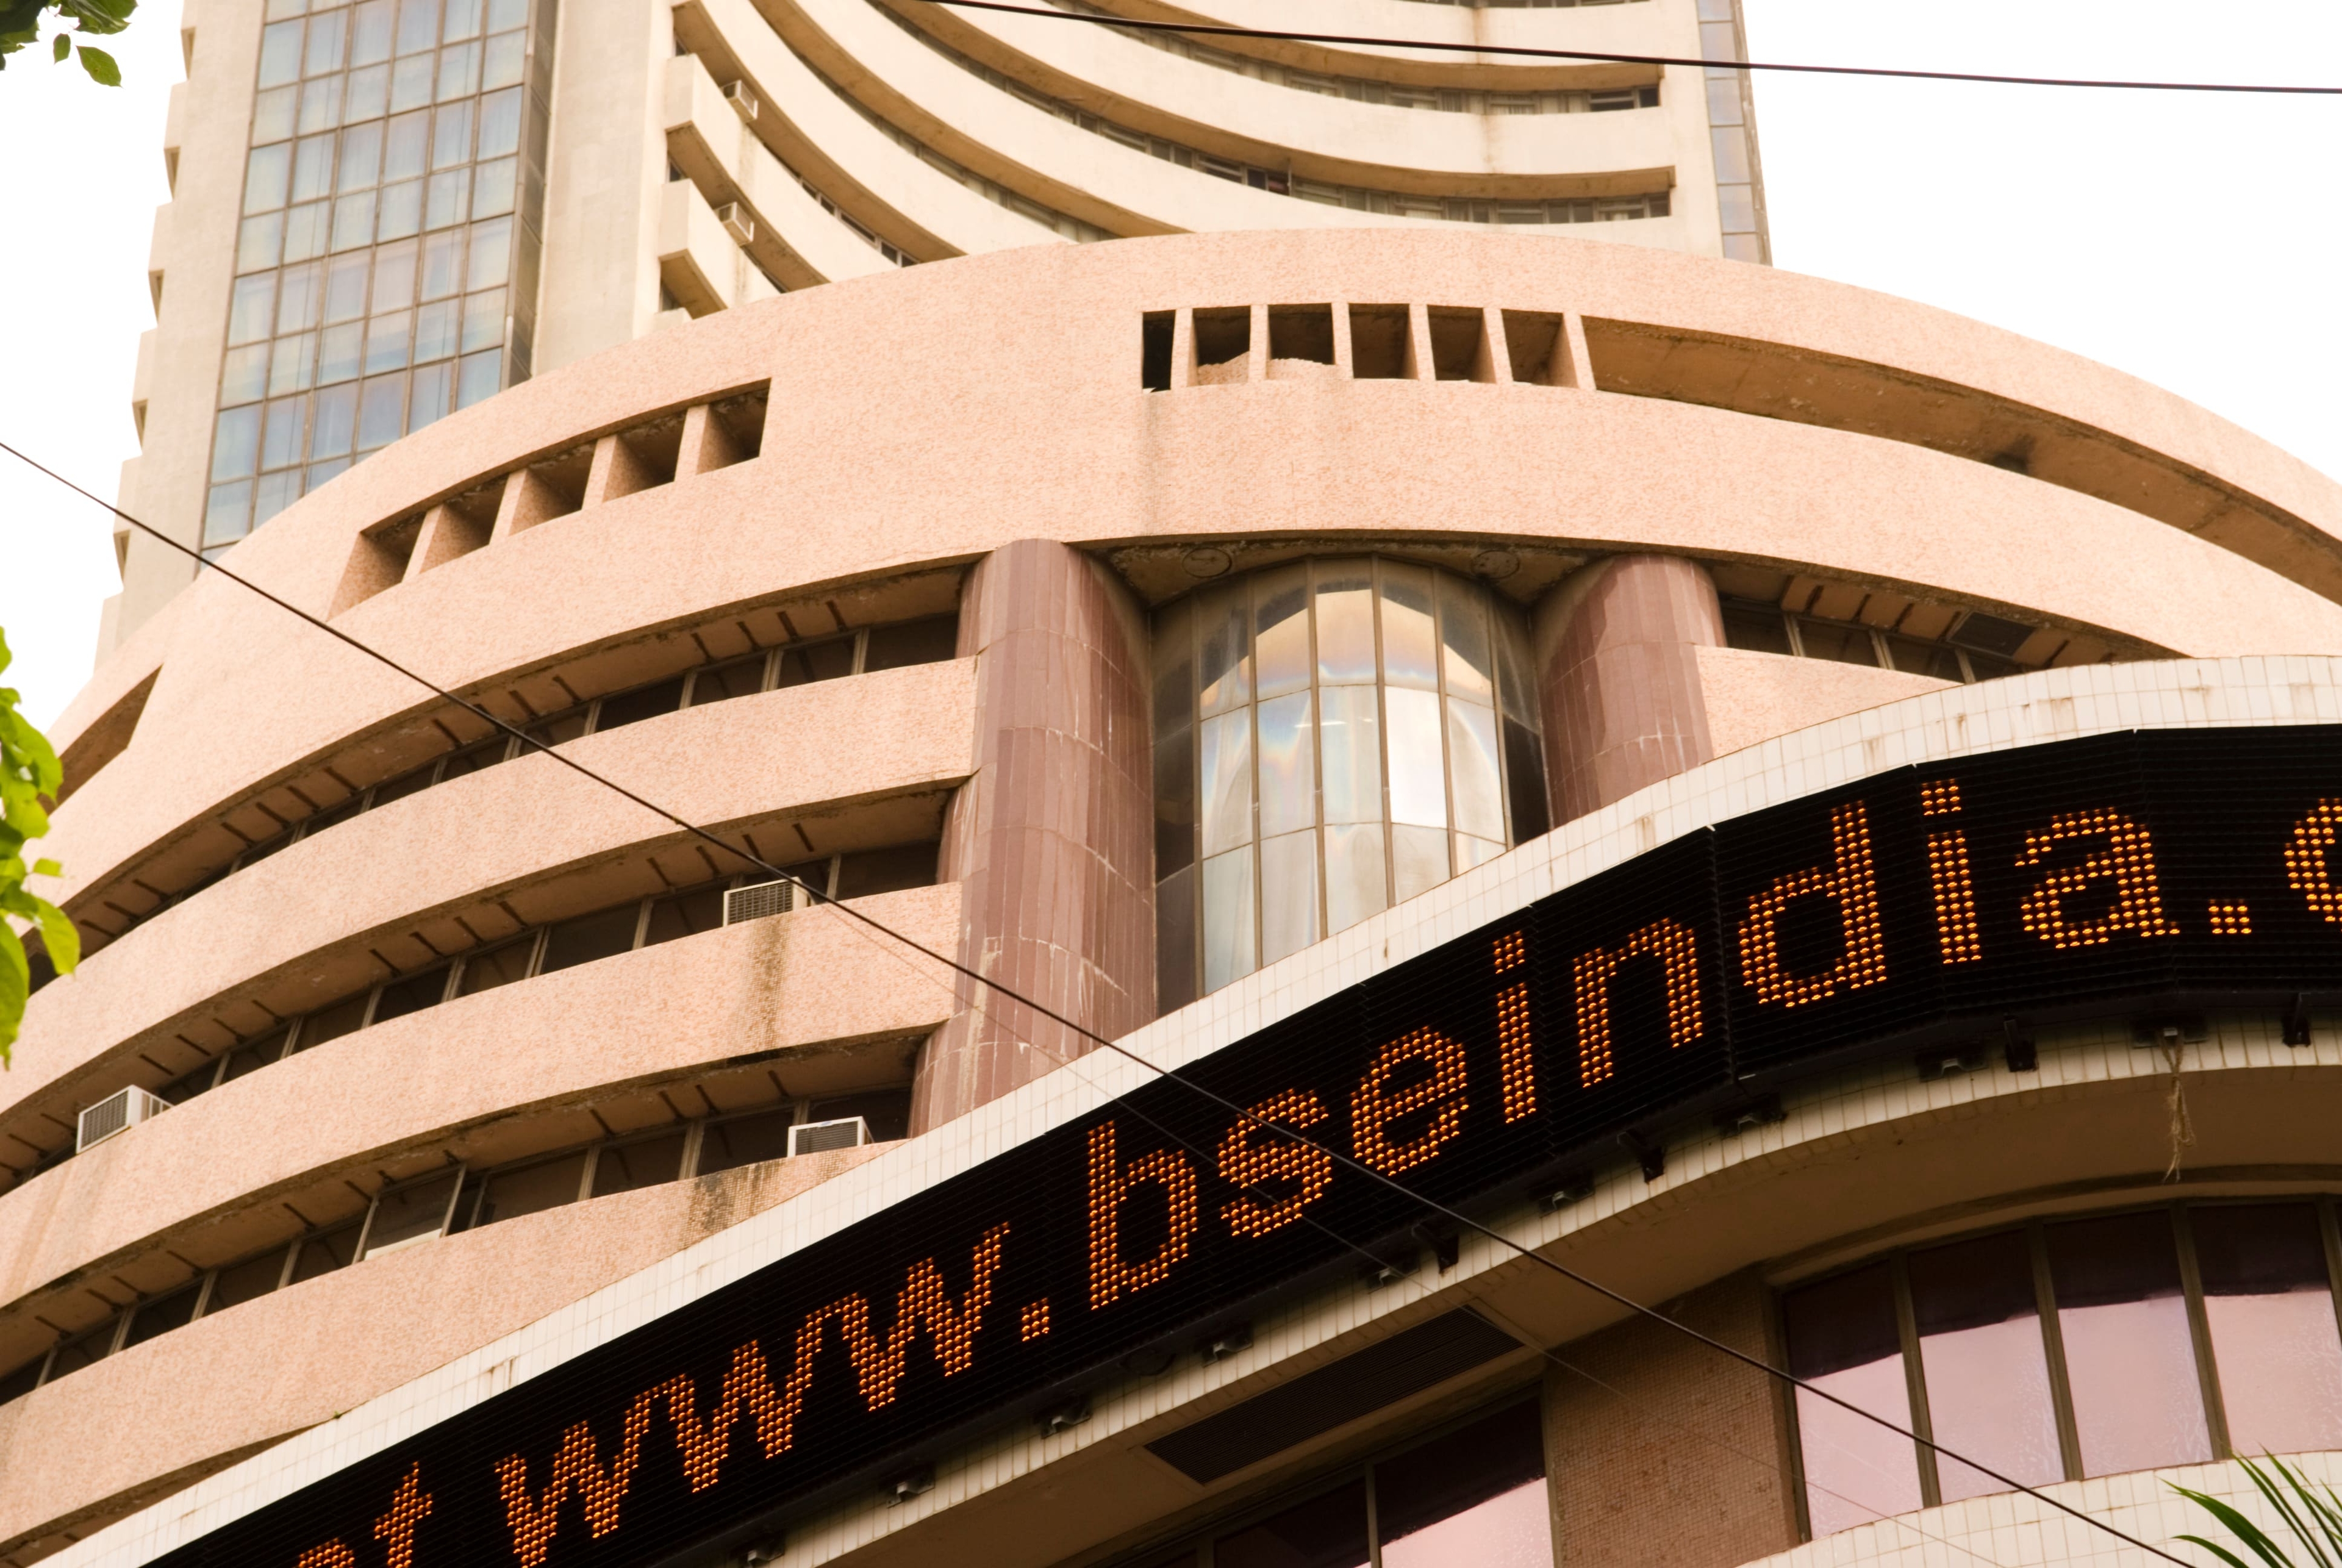 Indian equity benchmarks snapped its sis-session winning streak to settle lower on Tuesday dragged by losses in metal, IT, oil &amp; gas and select financial shares. The Sensex fell 709 points to settle at 55,777 and the broader Nifty50 benchmark settled at 16,663, down 208 points.